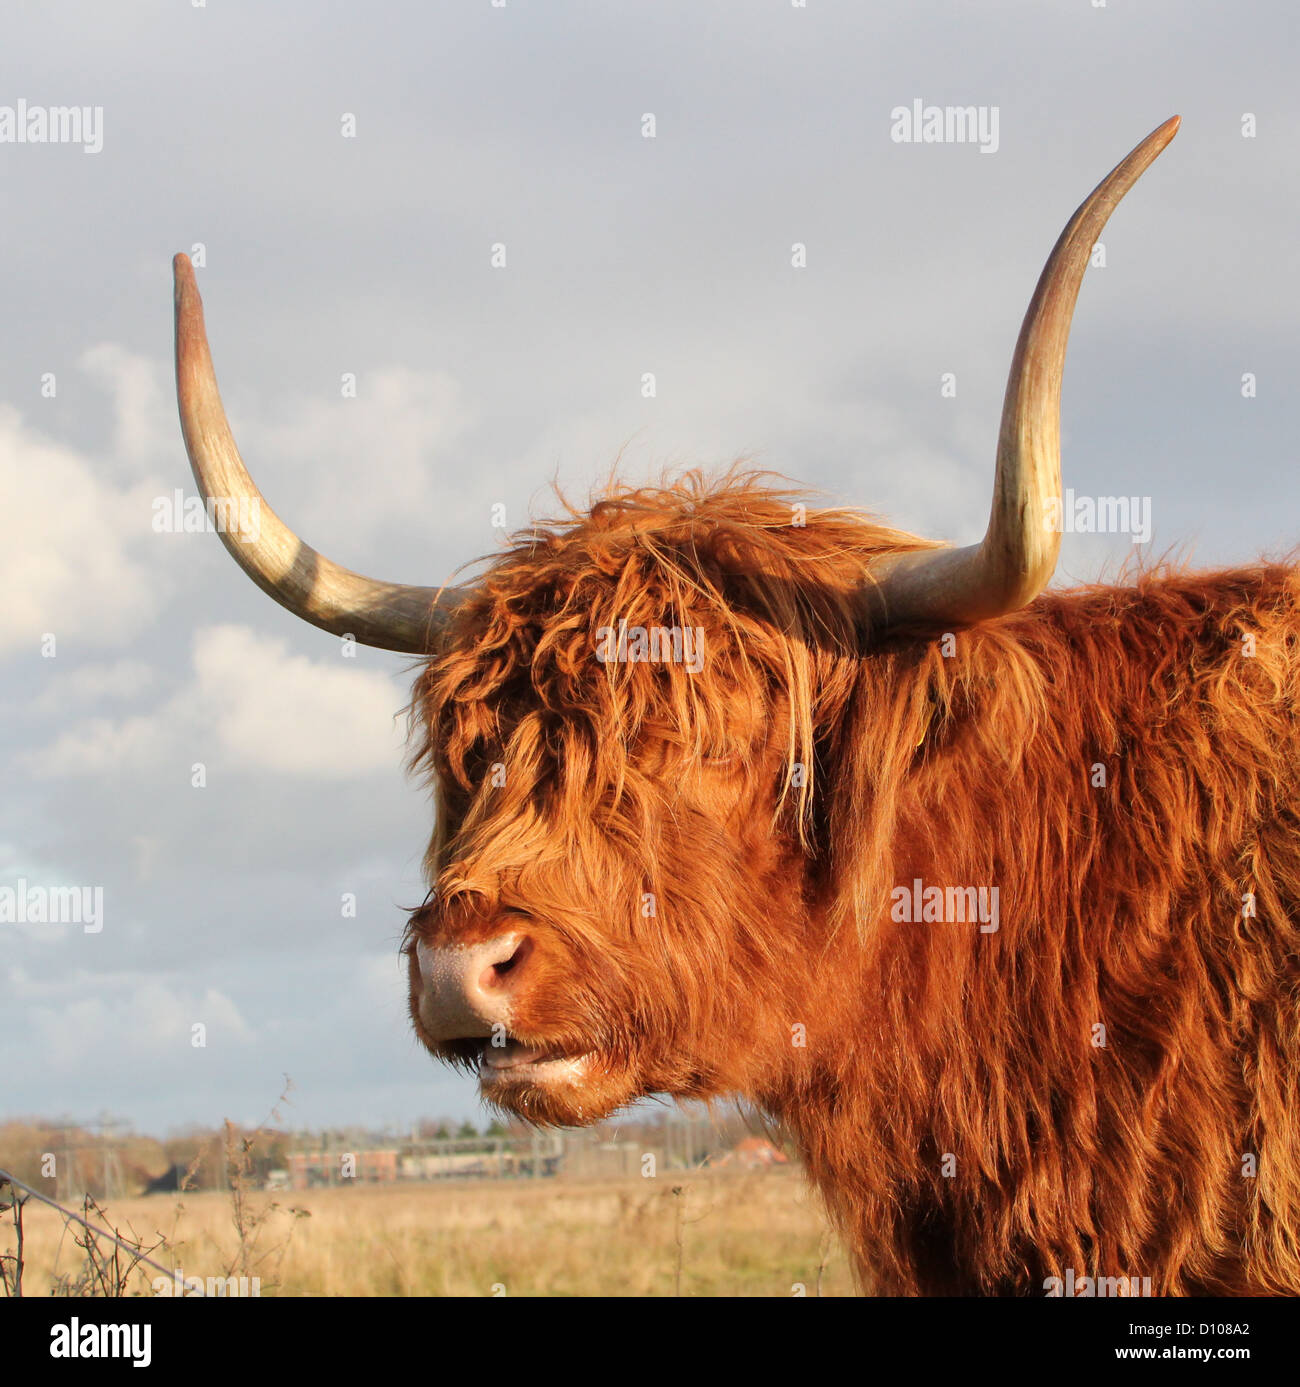 Portrait of the head and horns of a Highland bull (a.k.a Kyloe catlle) Stock Photo